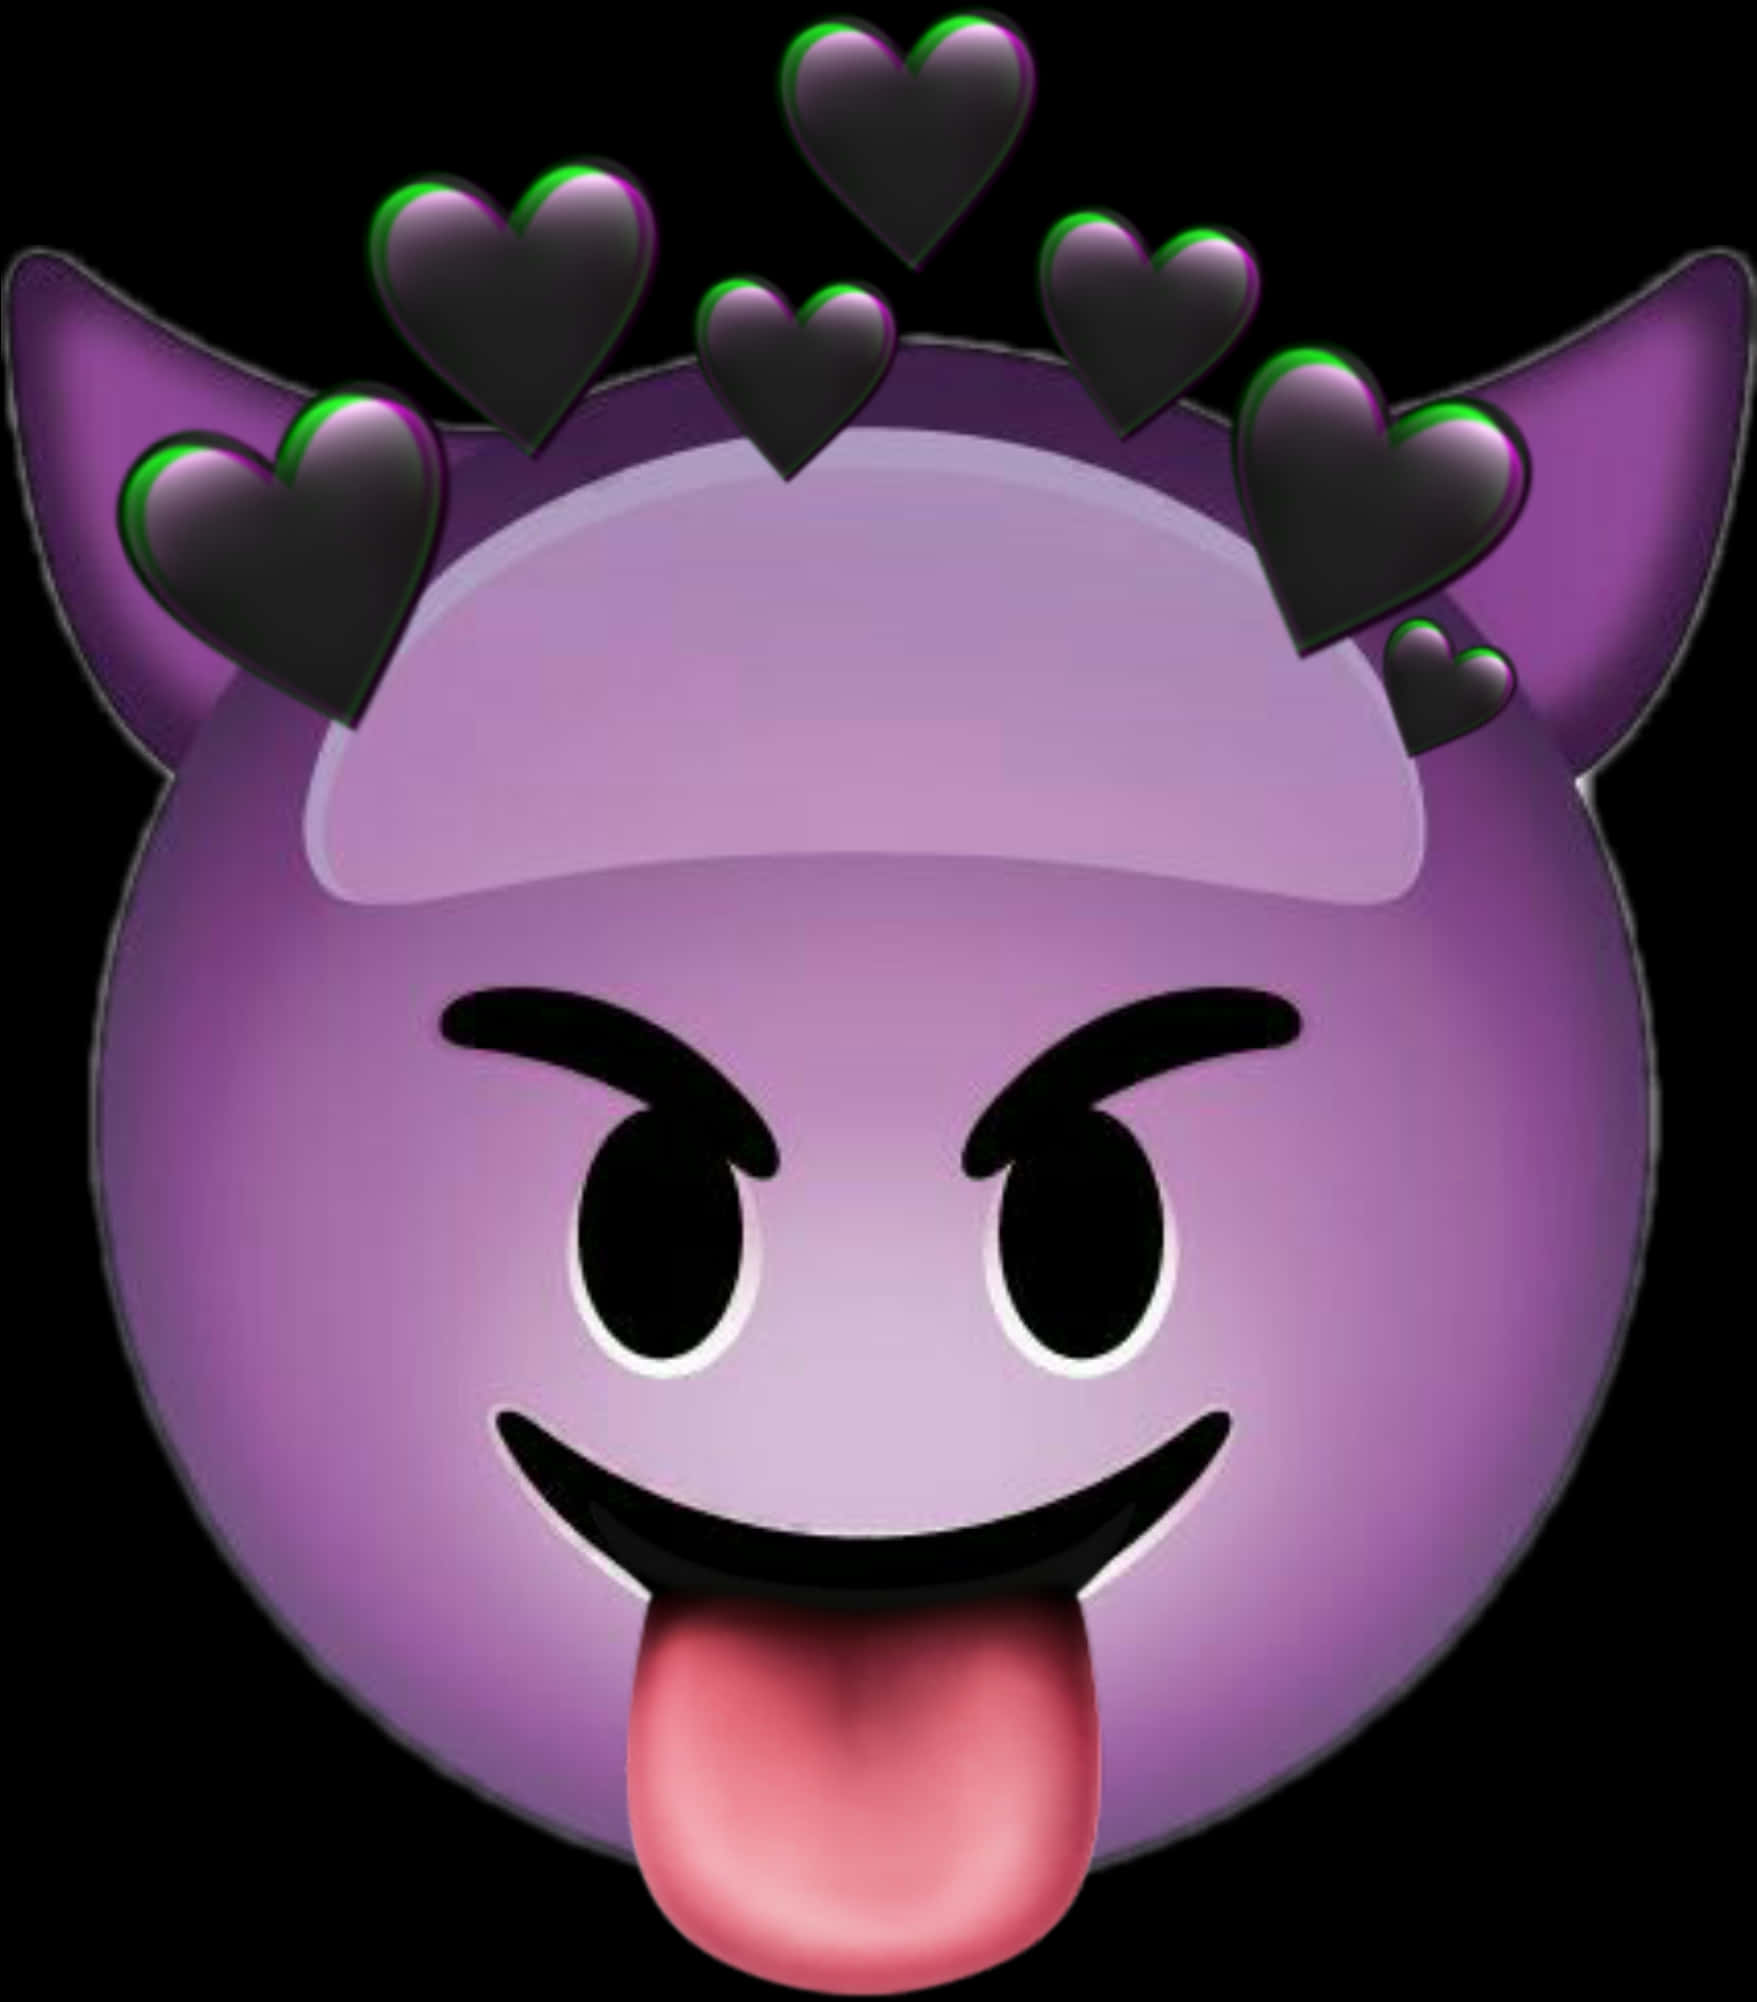 A Purple Emoji With Horns And Horns Sticking Out Tongue